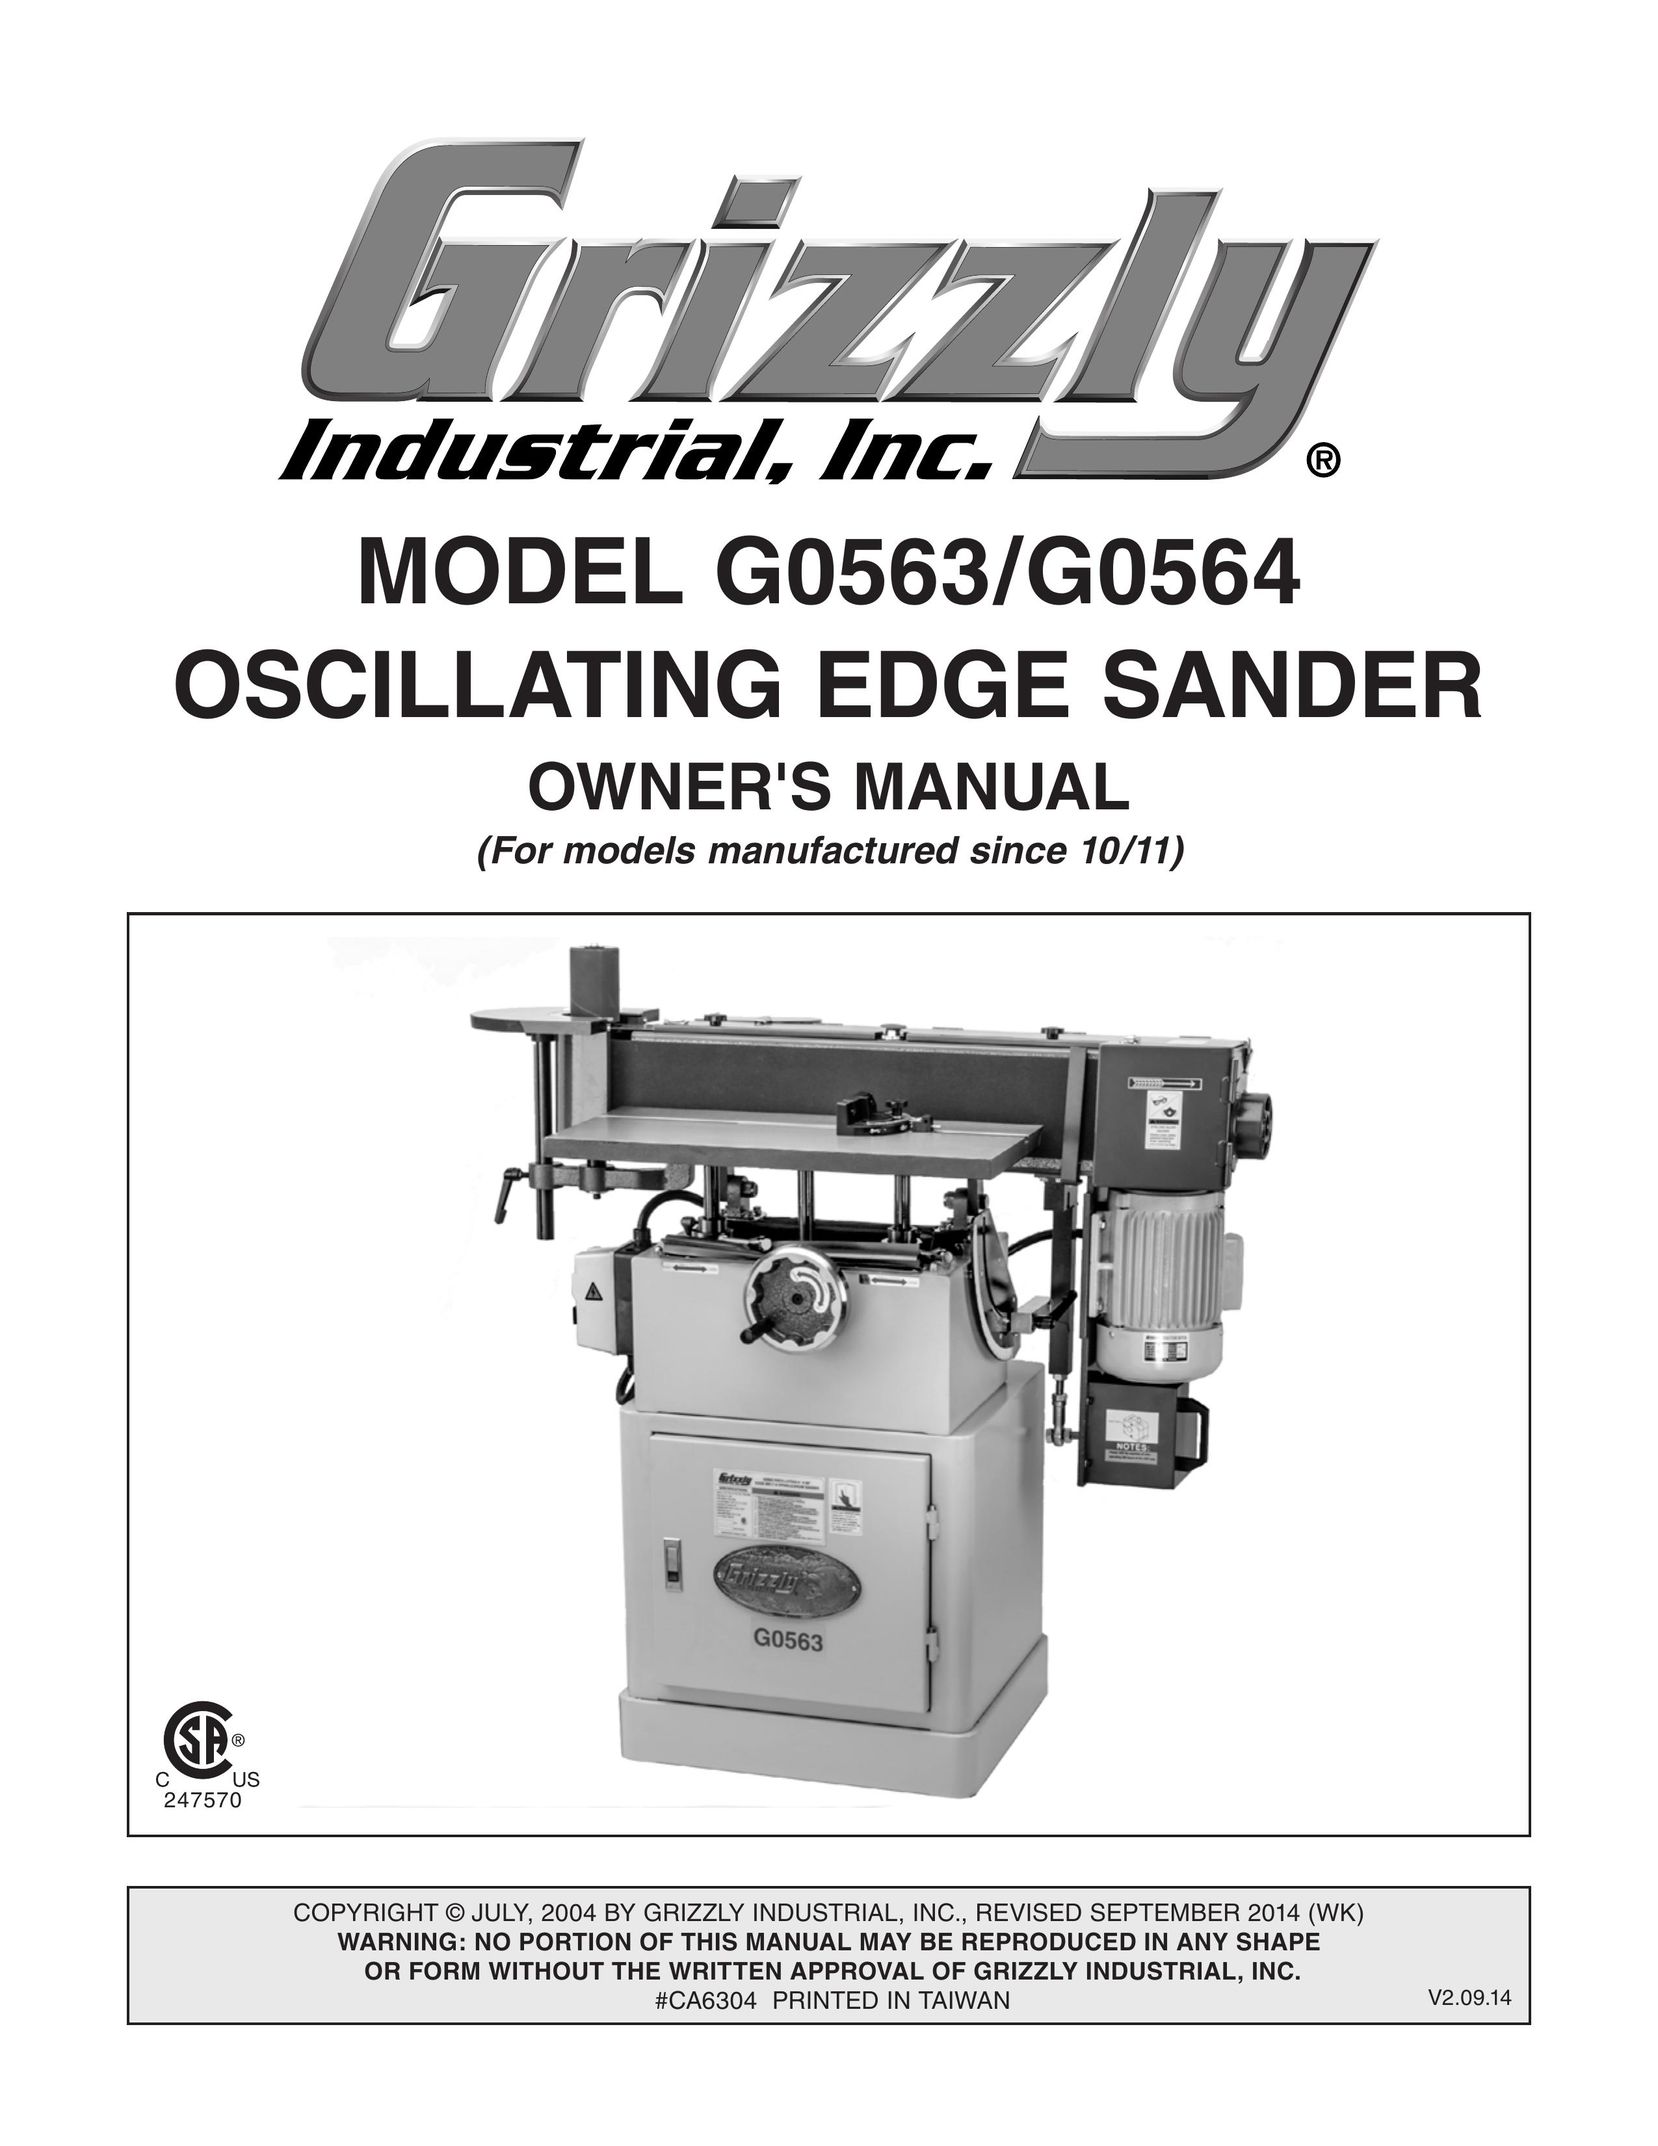 Grizzly G0564 Cordless Sander User Manual